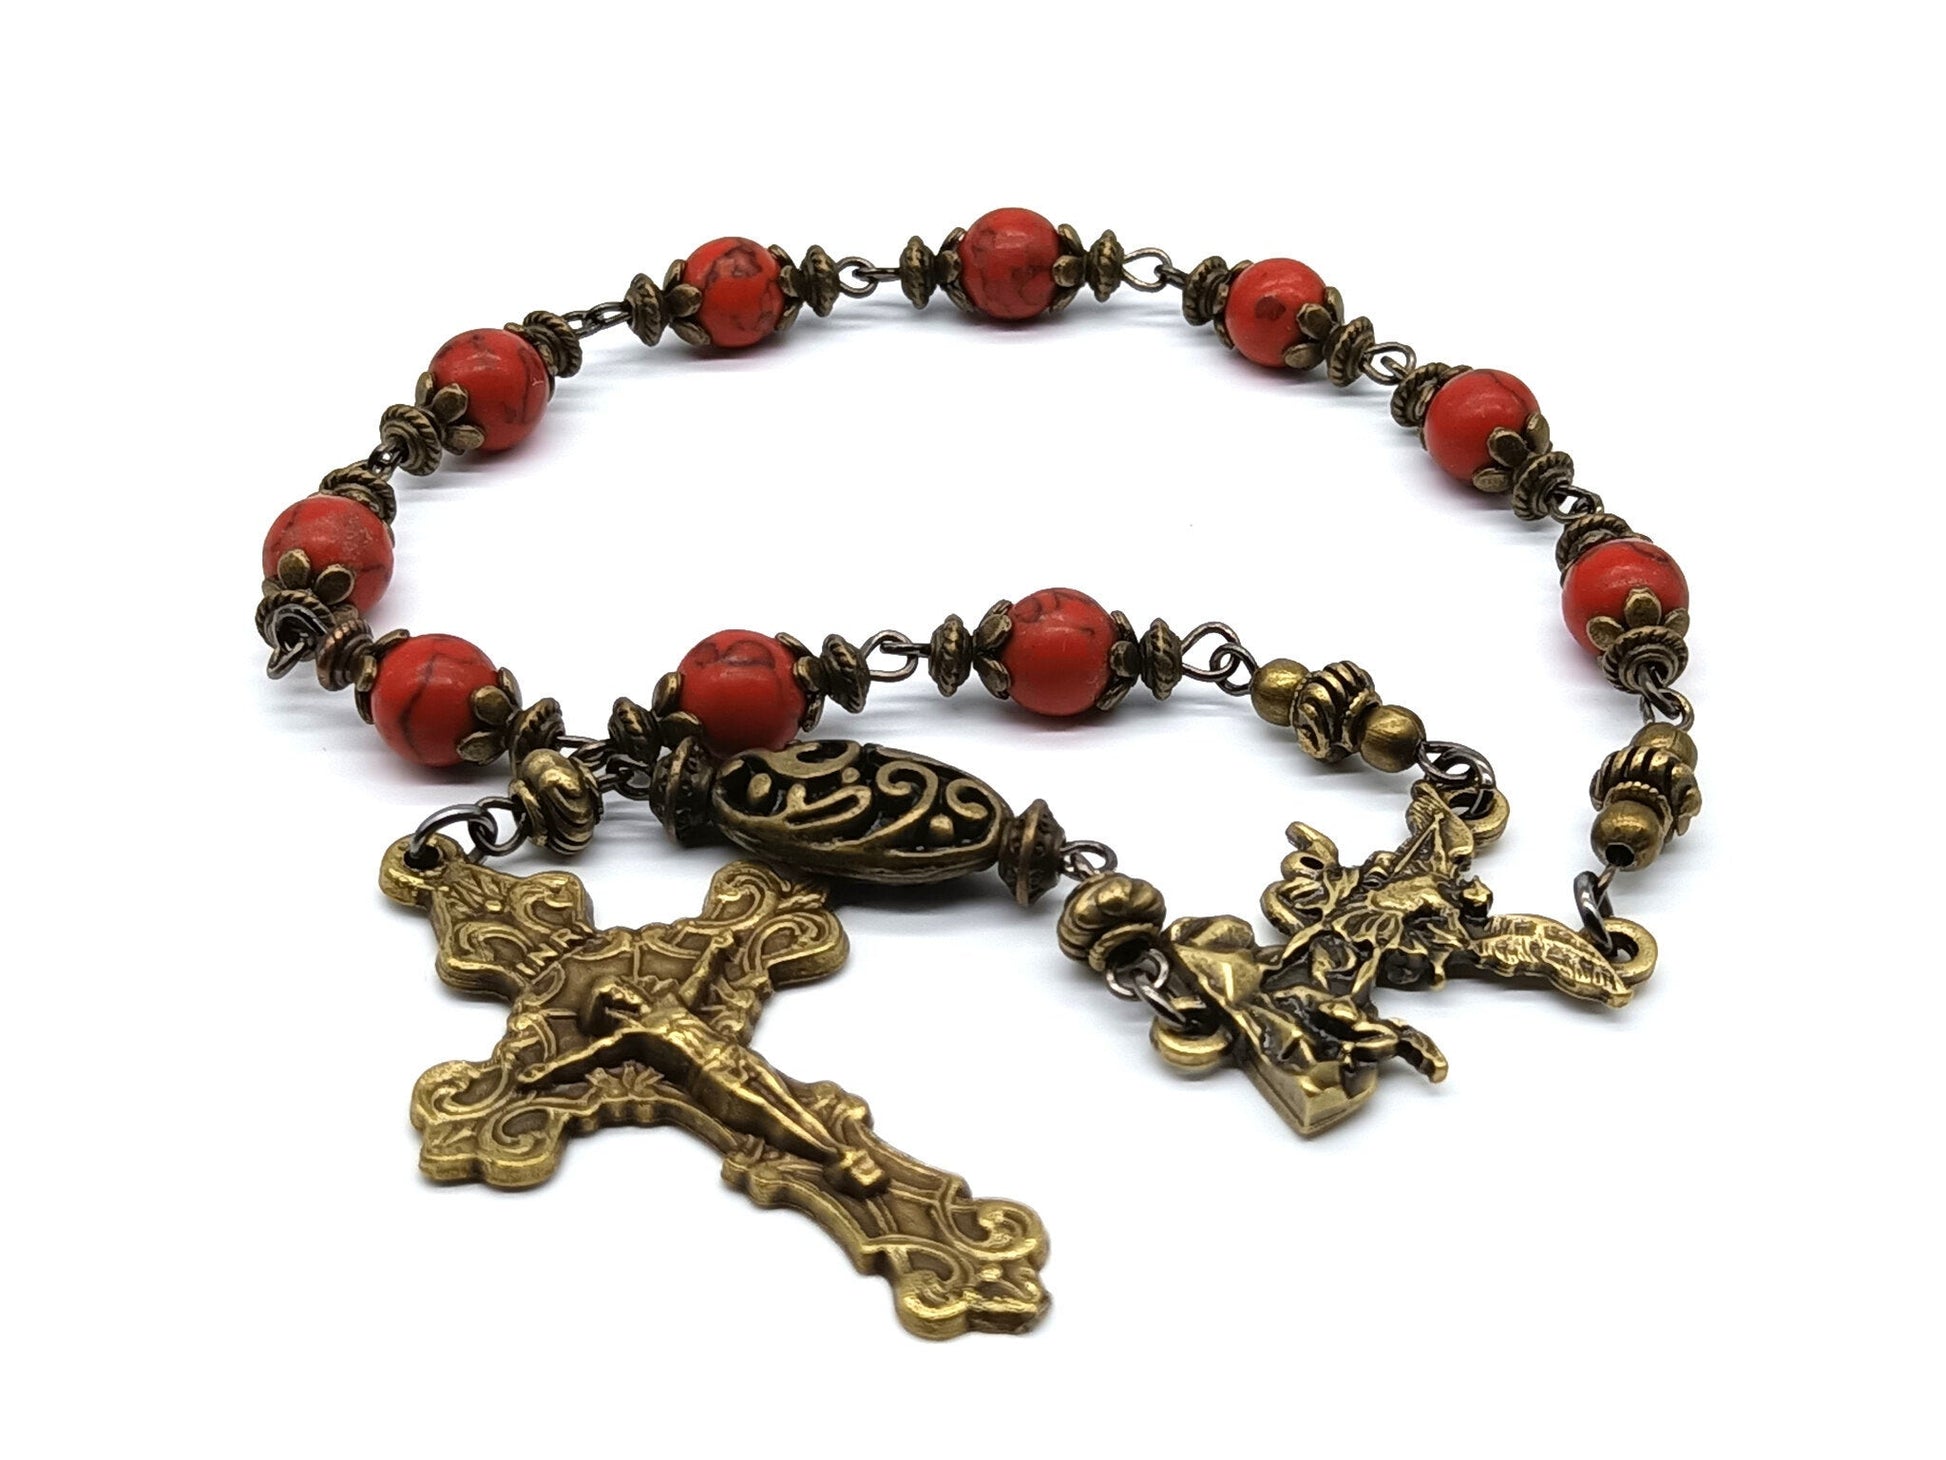 Saint Michael unique rosary beads single decade with bloodstone gemstone beads, bronze crucifix, St. Michael centre medal and bead caps.